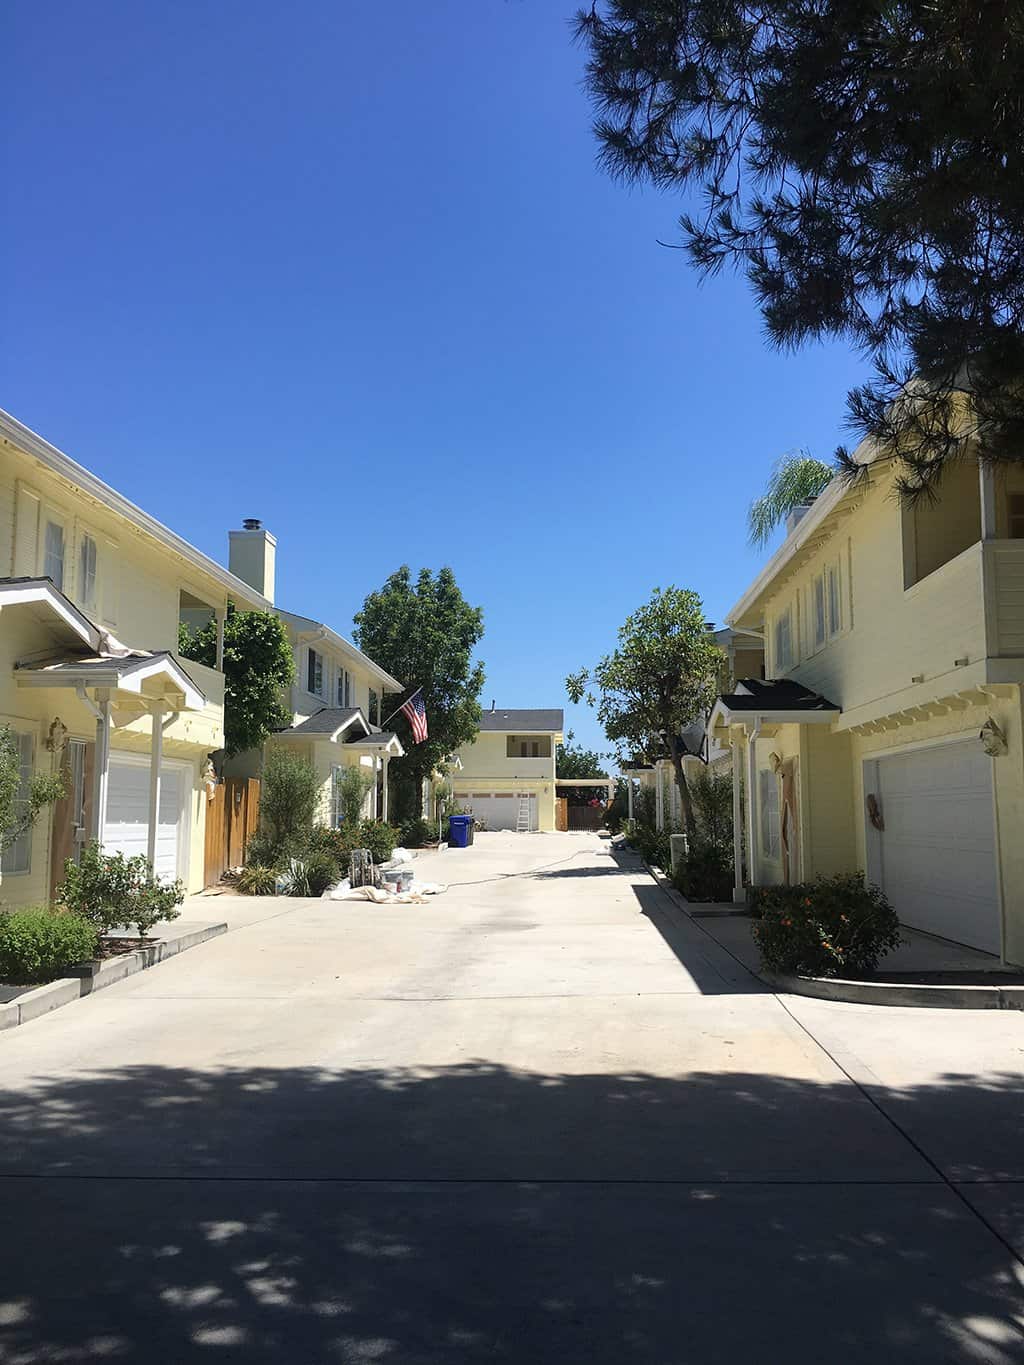 San Diego Painting HOA Project - We offer you a complete line of professional interior and exterior painting services for your HOA. Procoat Painting provides great value with every project.